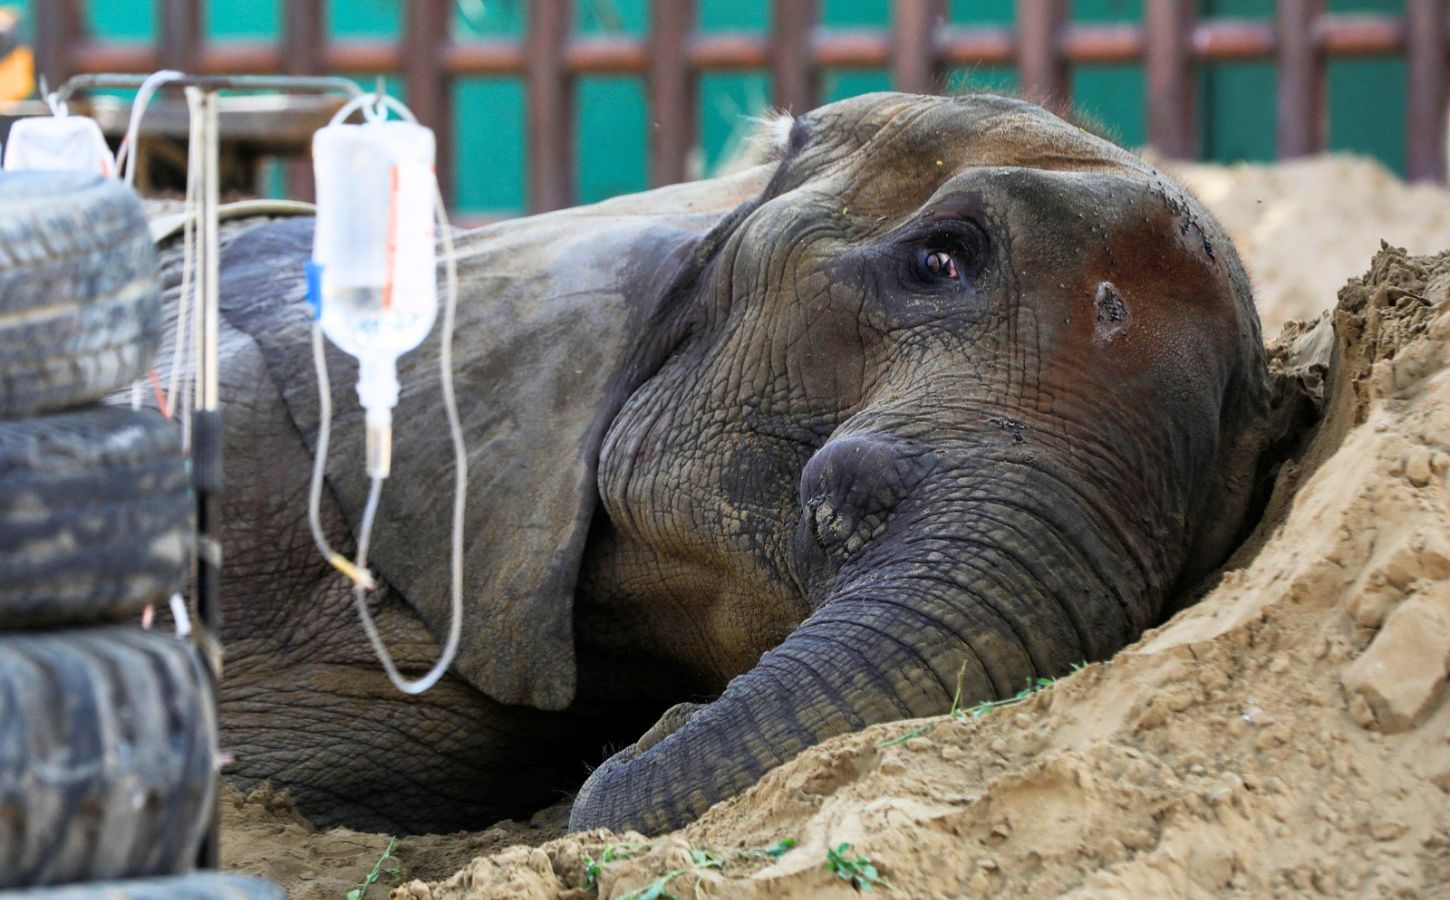 Noor Jahan, an elephant at Karachi Zoo, rests on a sand pile as she is cared for